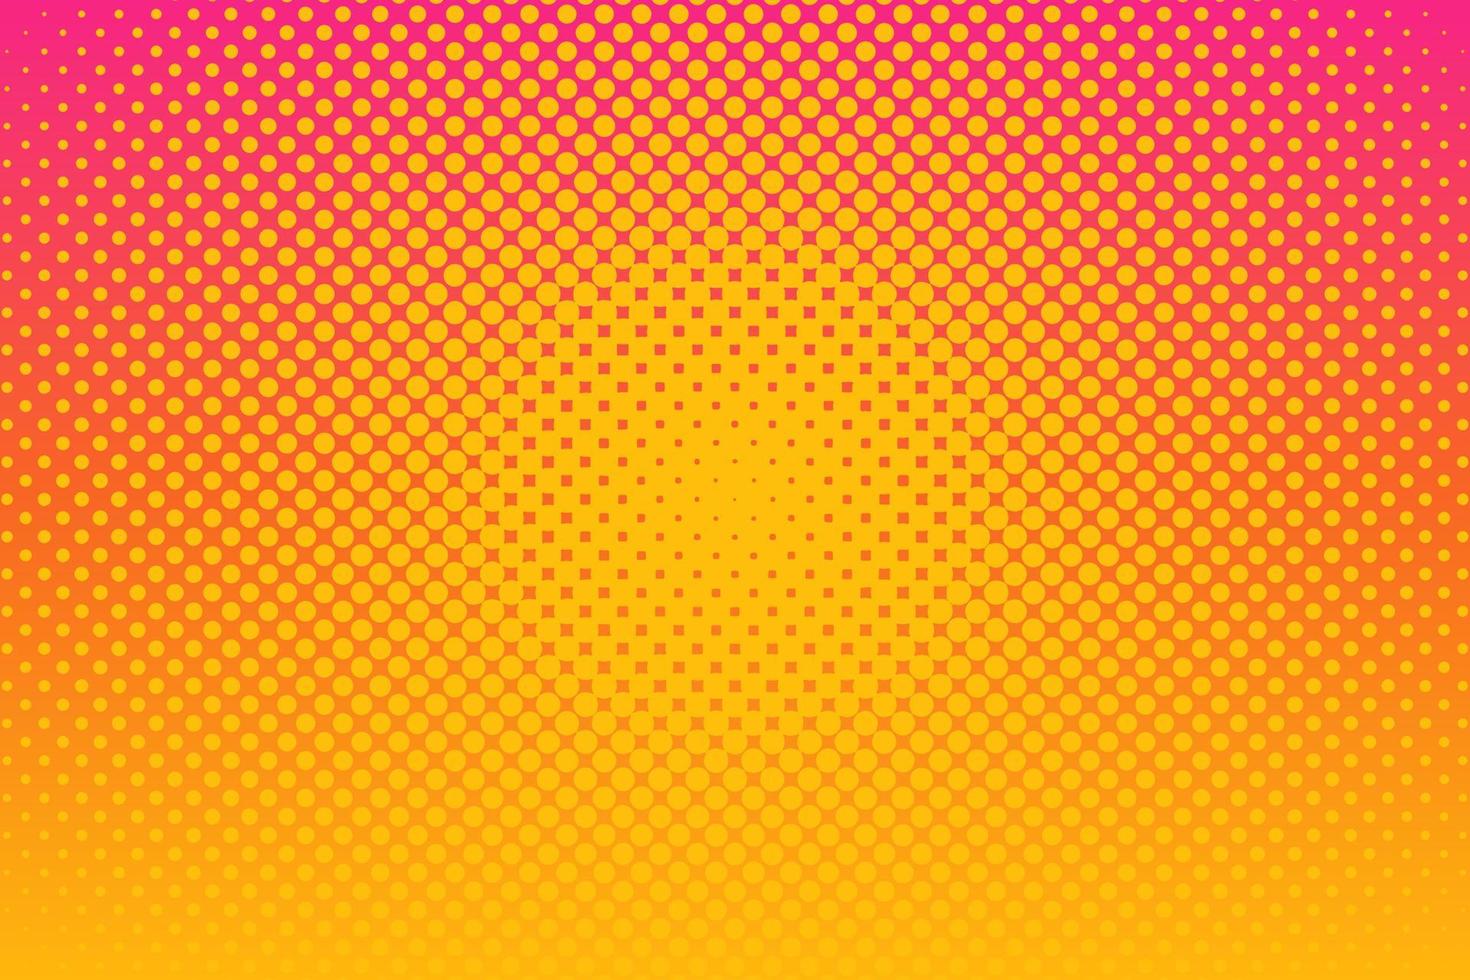 Pink yellow pop art background with halftone dots in retro comic style. Vector illustration.